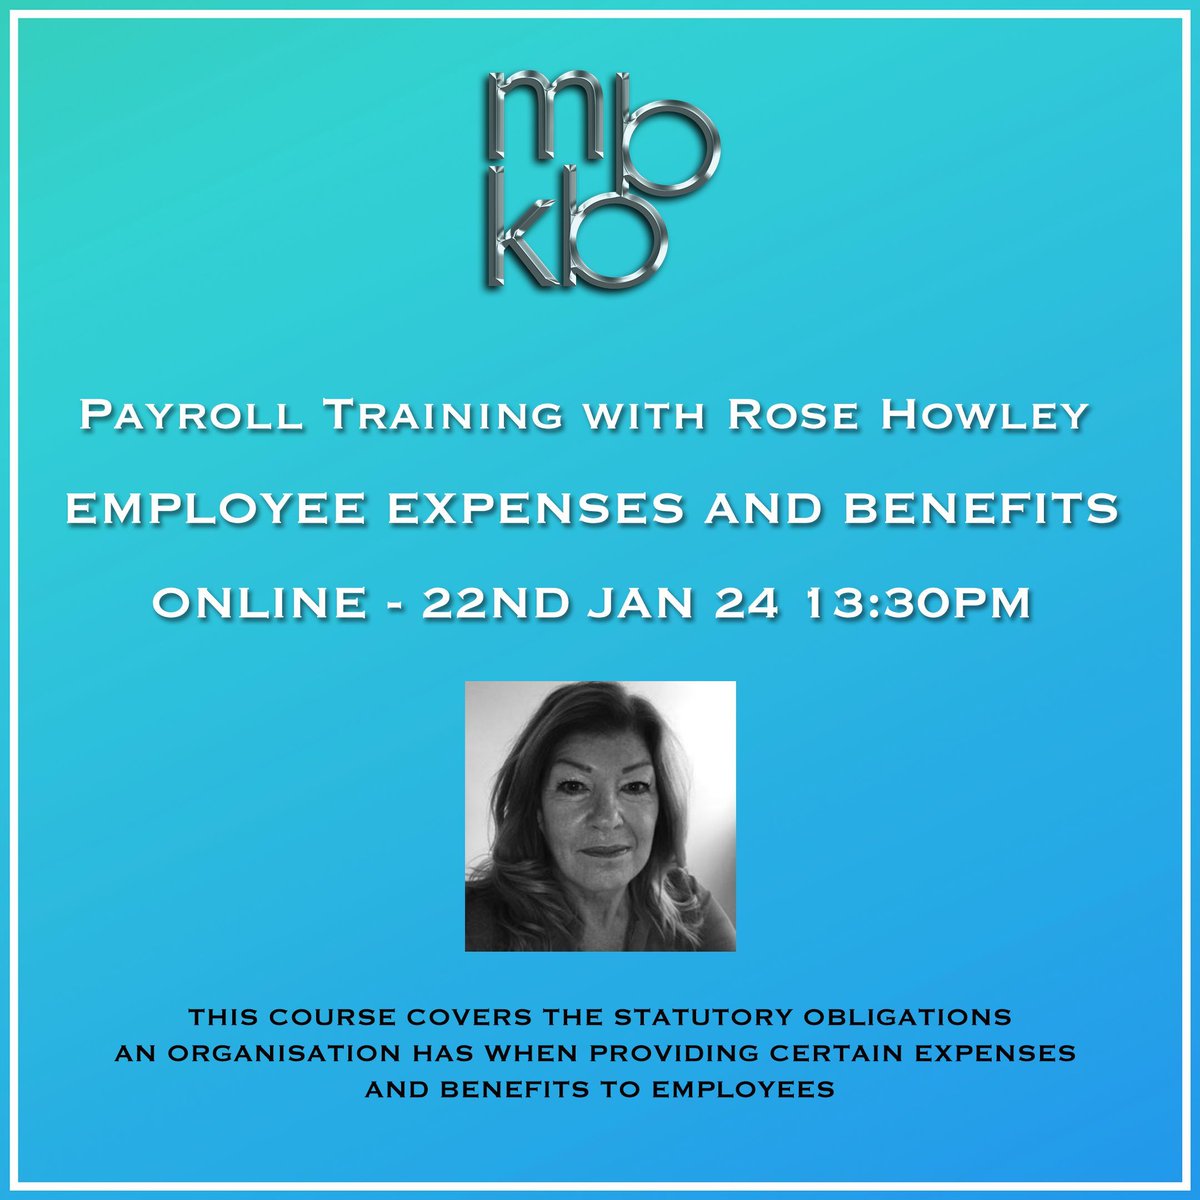 It's here! Join Rose Howley for our fourth online Payroll training session today at 1 pm! 📅🕐 Employee Expenses and Benefits - Part 1
📅 Online - 22nd Jan 24, 13:30 PM
🔗 Sign up: buff.ly/3FOlx96
Open to all at £75 per slot. 💼🌐 #MBKB #PayrollTraining #StatutoryPayments